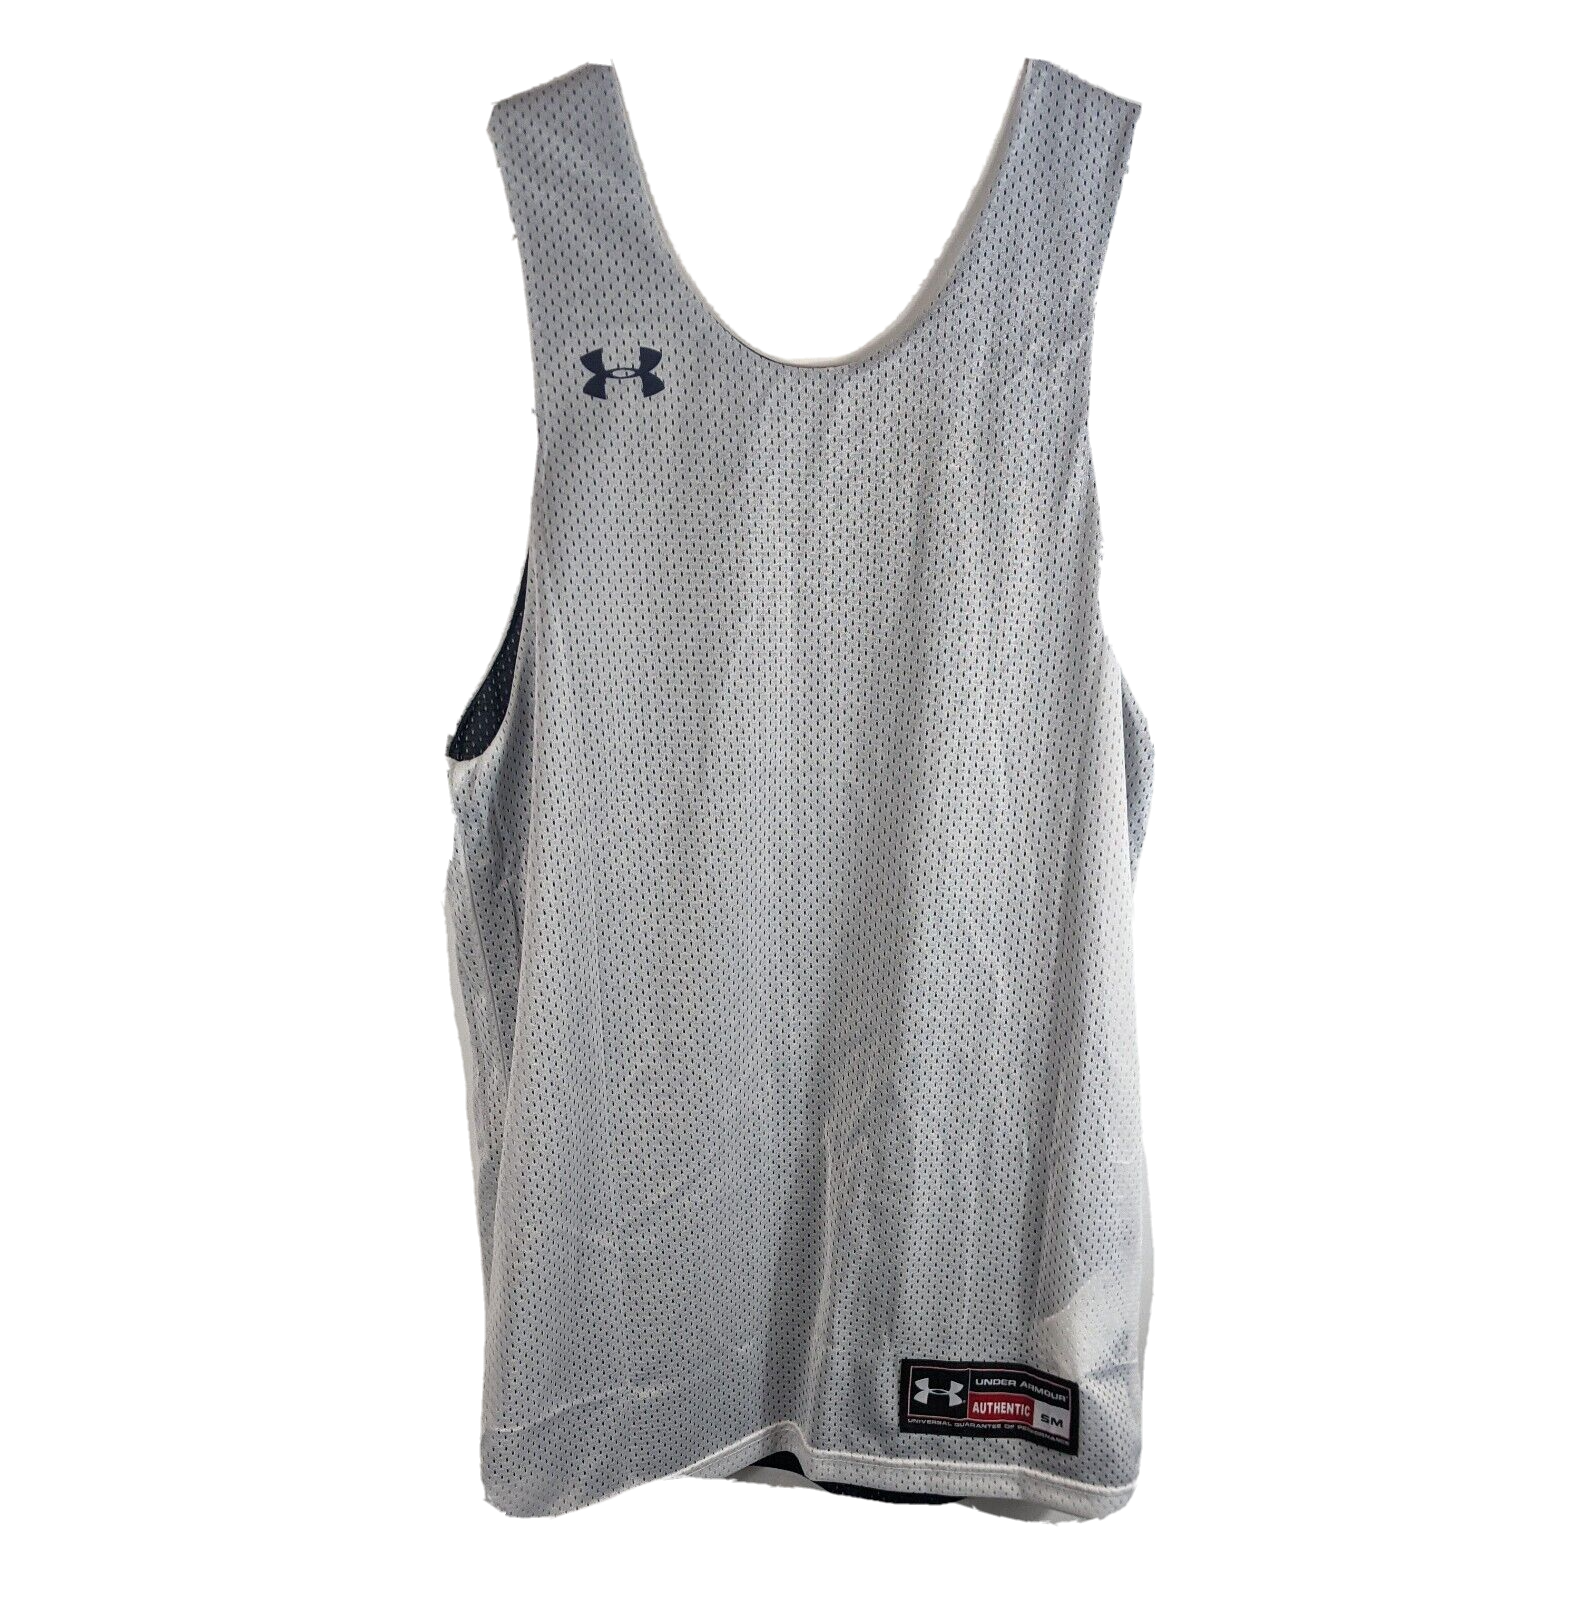 Kids Sports Jersey Size XL Blue and White Reversible (Under Armour) - $19.18